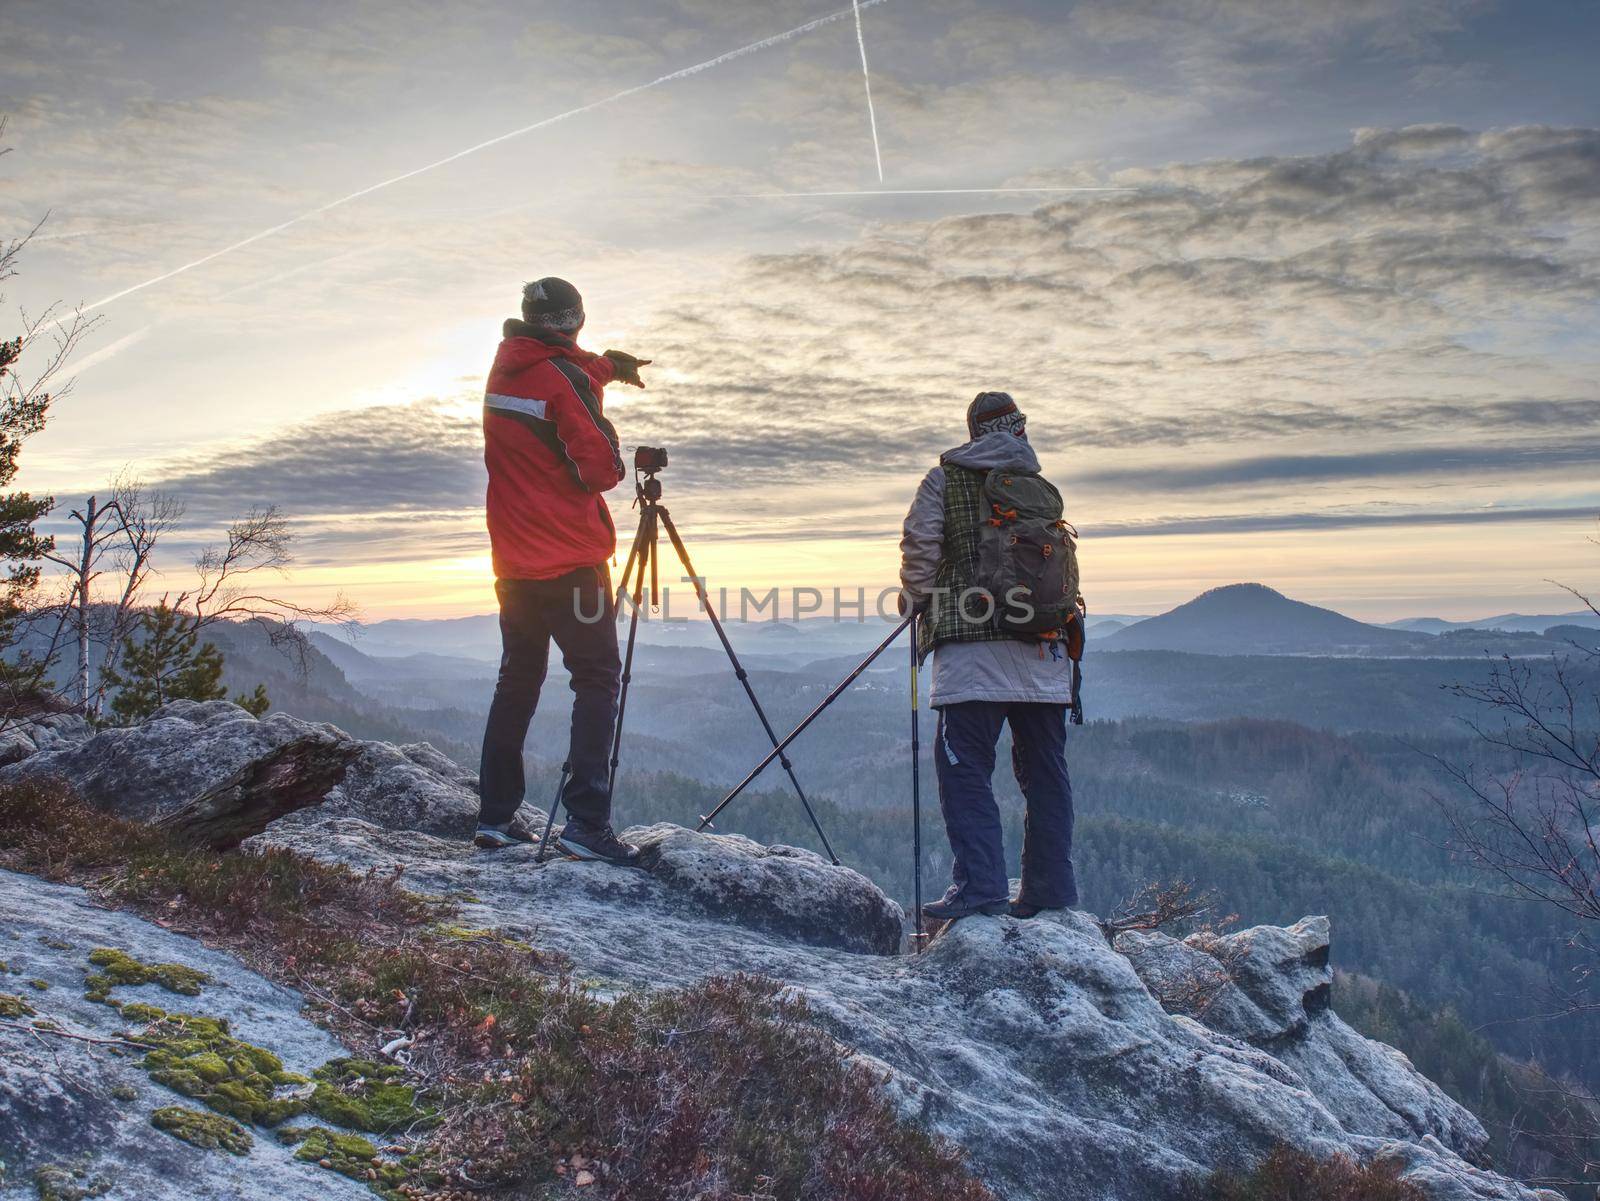 Nature photographers in red and light jacket take photo by rdonar2